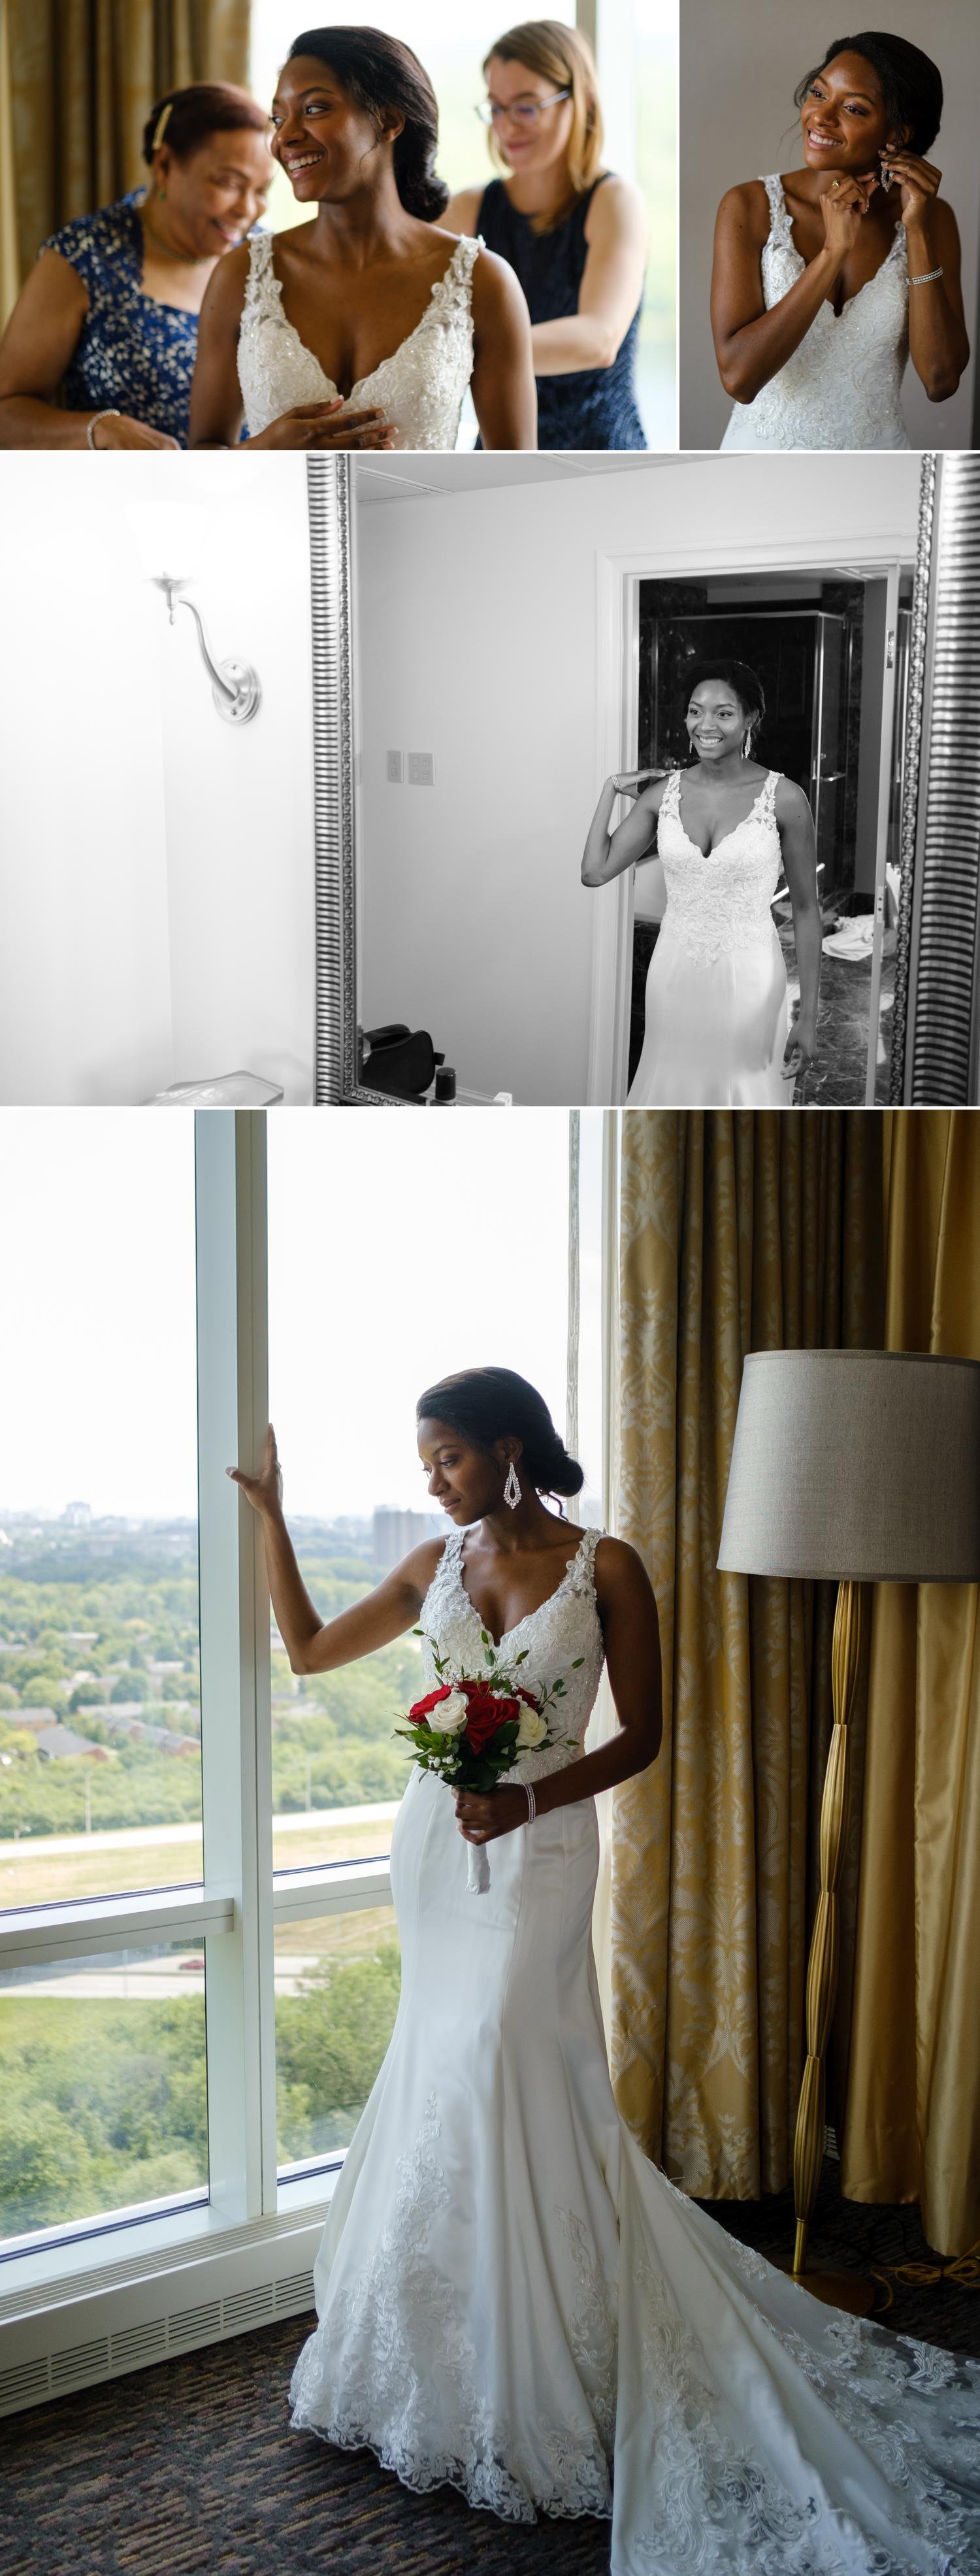 photos of a bride getting ready for her wedding day